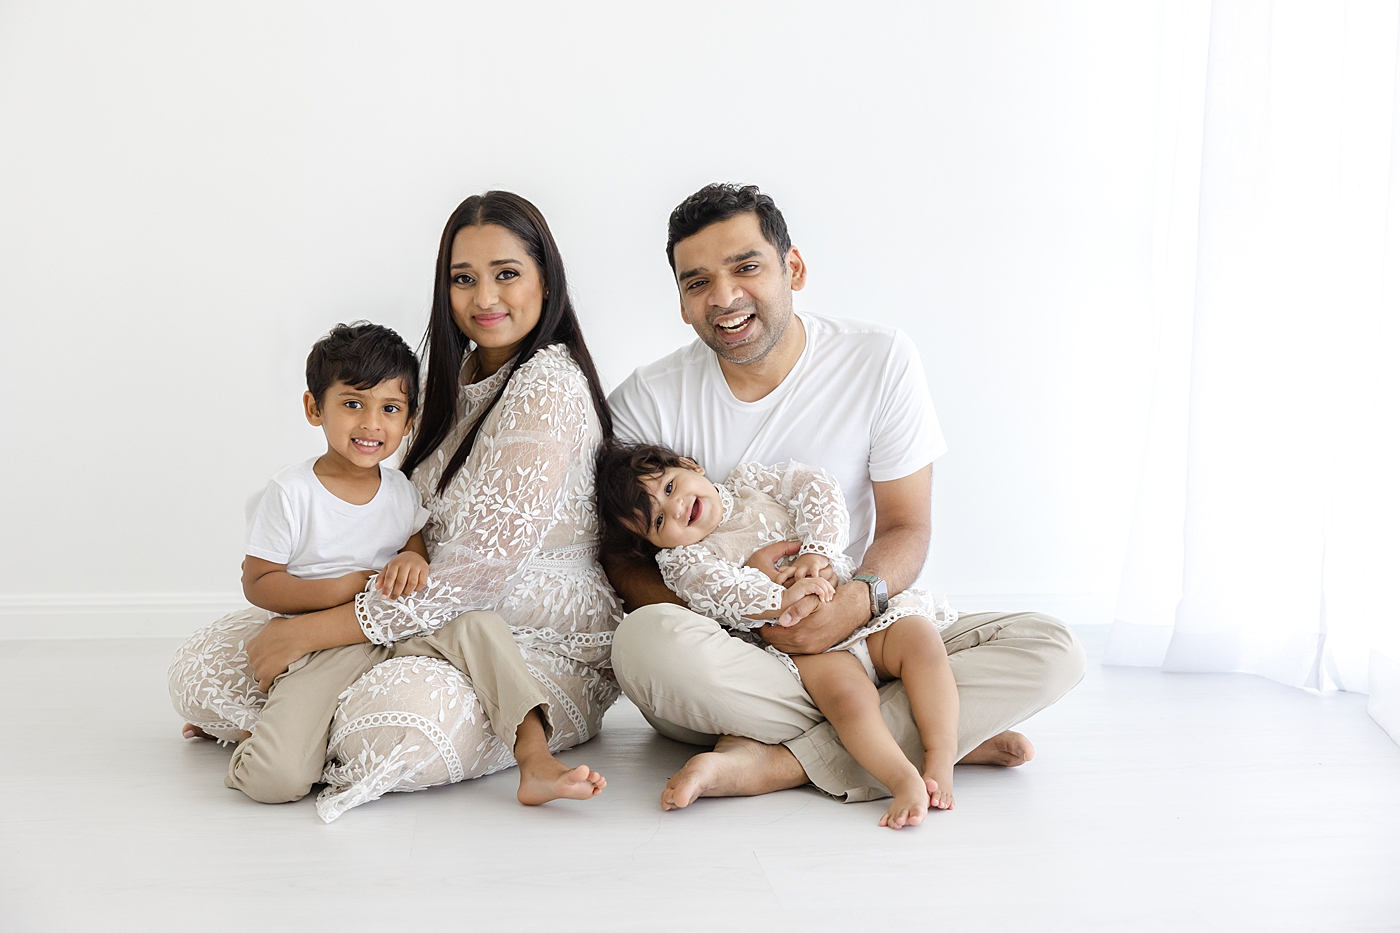 Family of four sitting on the studio floor with a white background | Image by Sana Ahmed